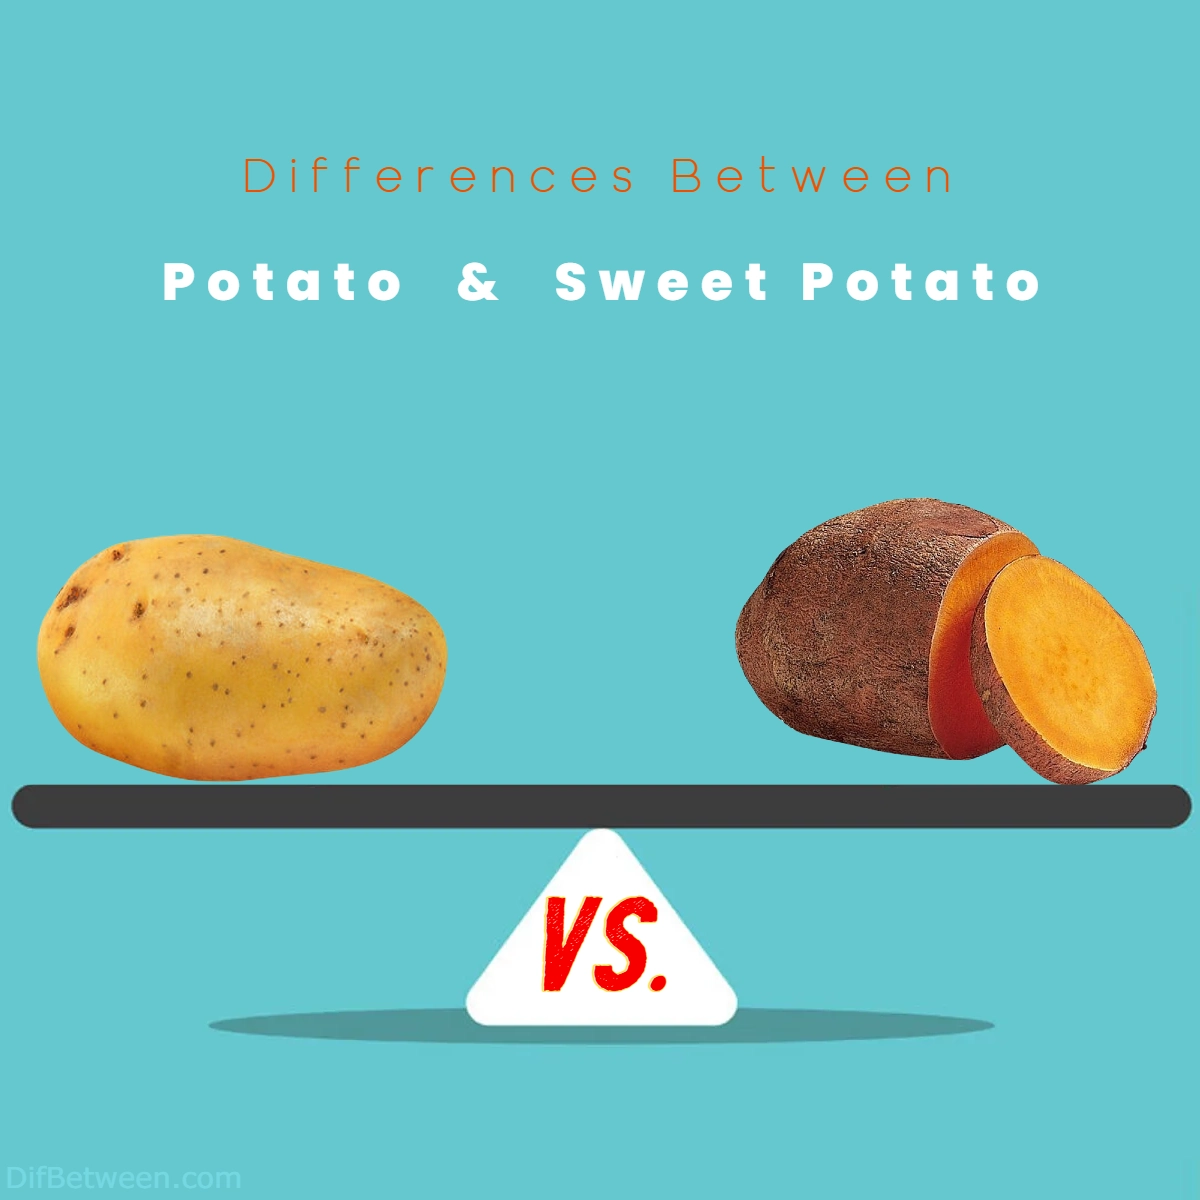 Difference Between Potato and Sweet Potato